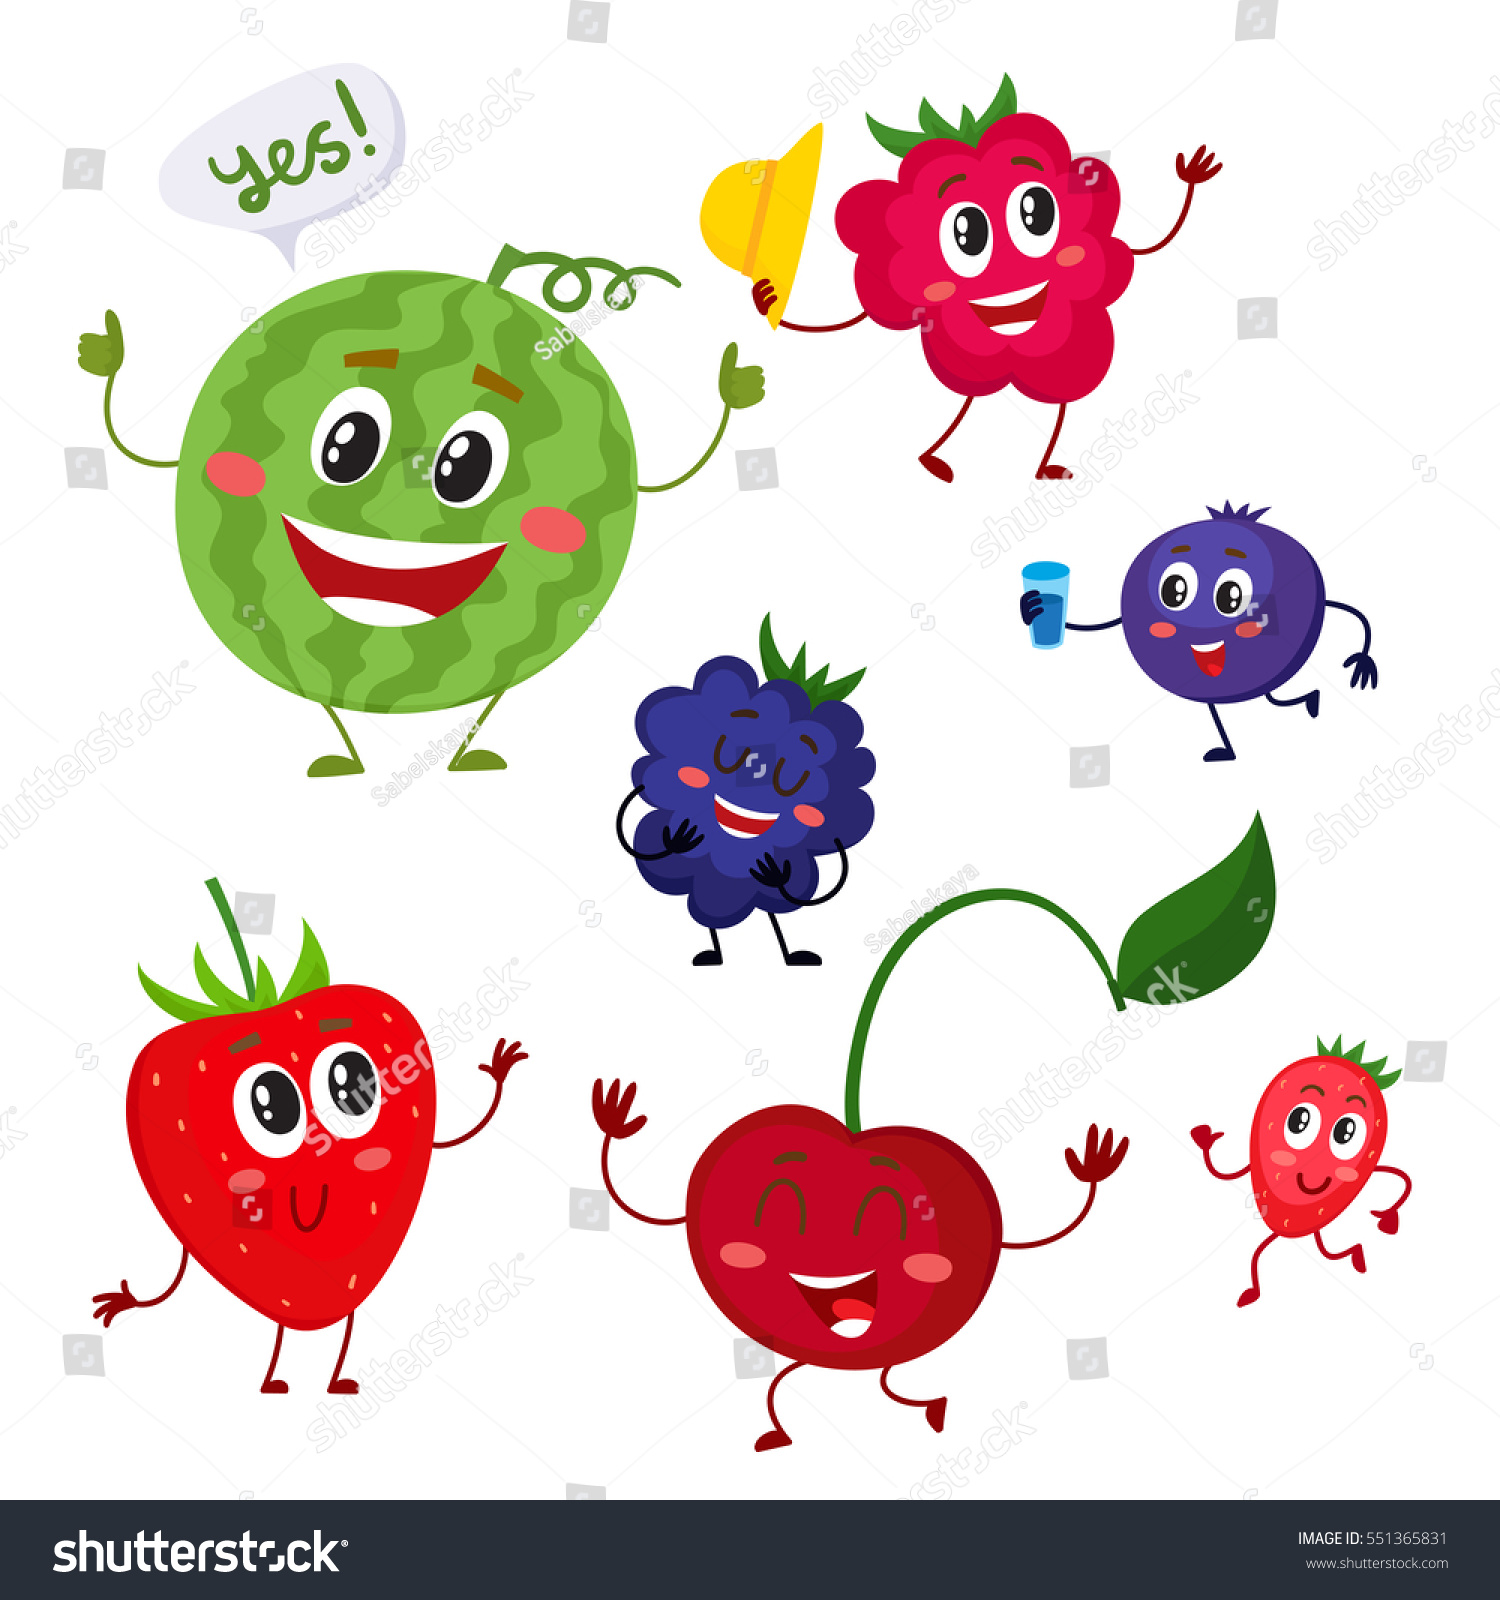 Set of cute and funny berry characters - watermelon, blackberry, strawberry, raspberry, blueberry, cherry, cartoon vector illustration isolated on white background. Comic style berry characters #551365831